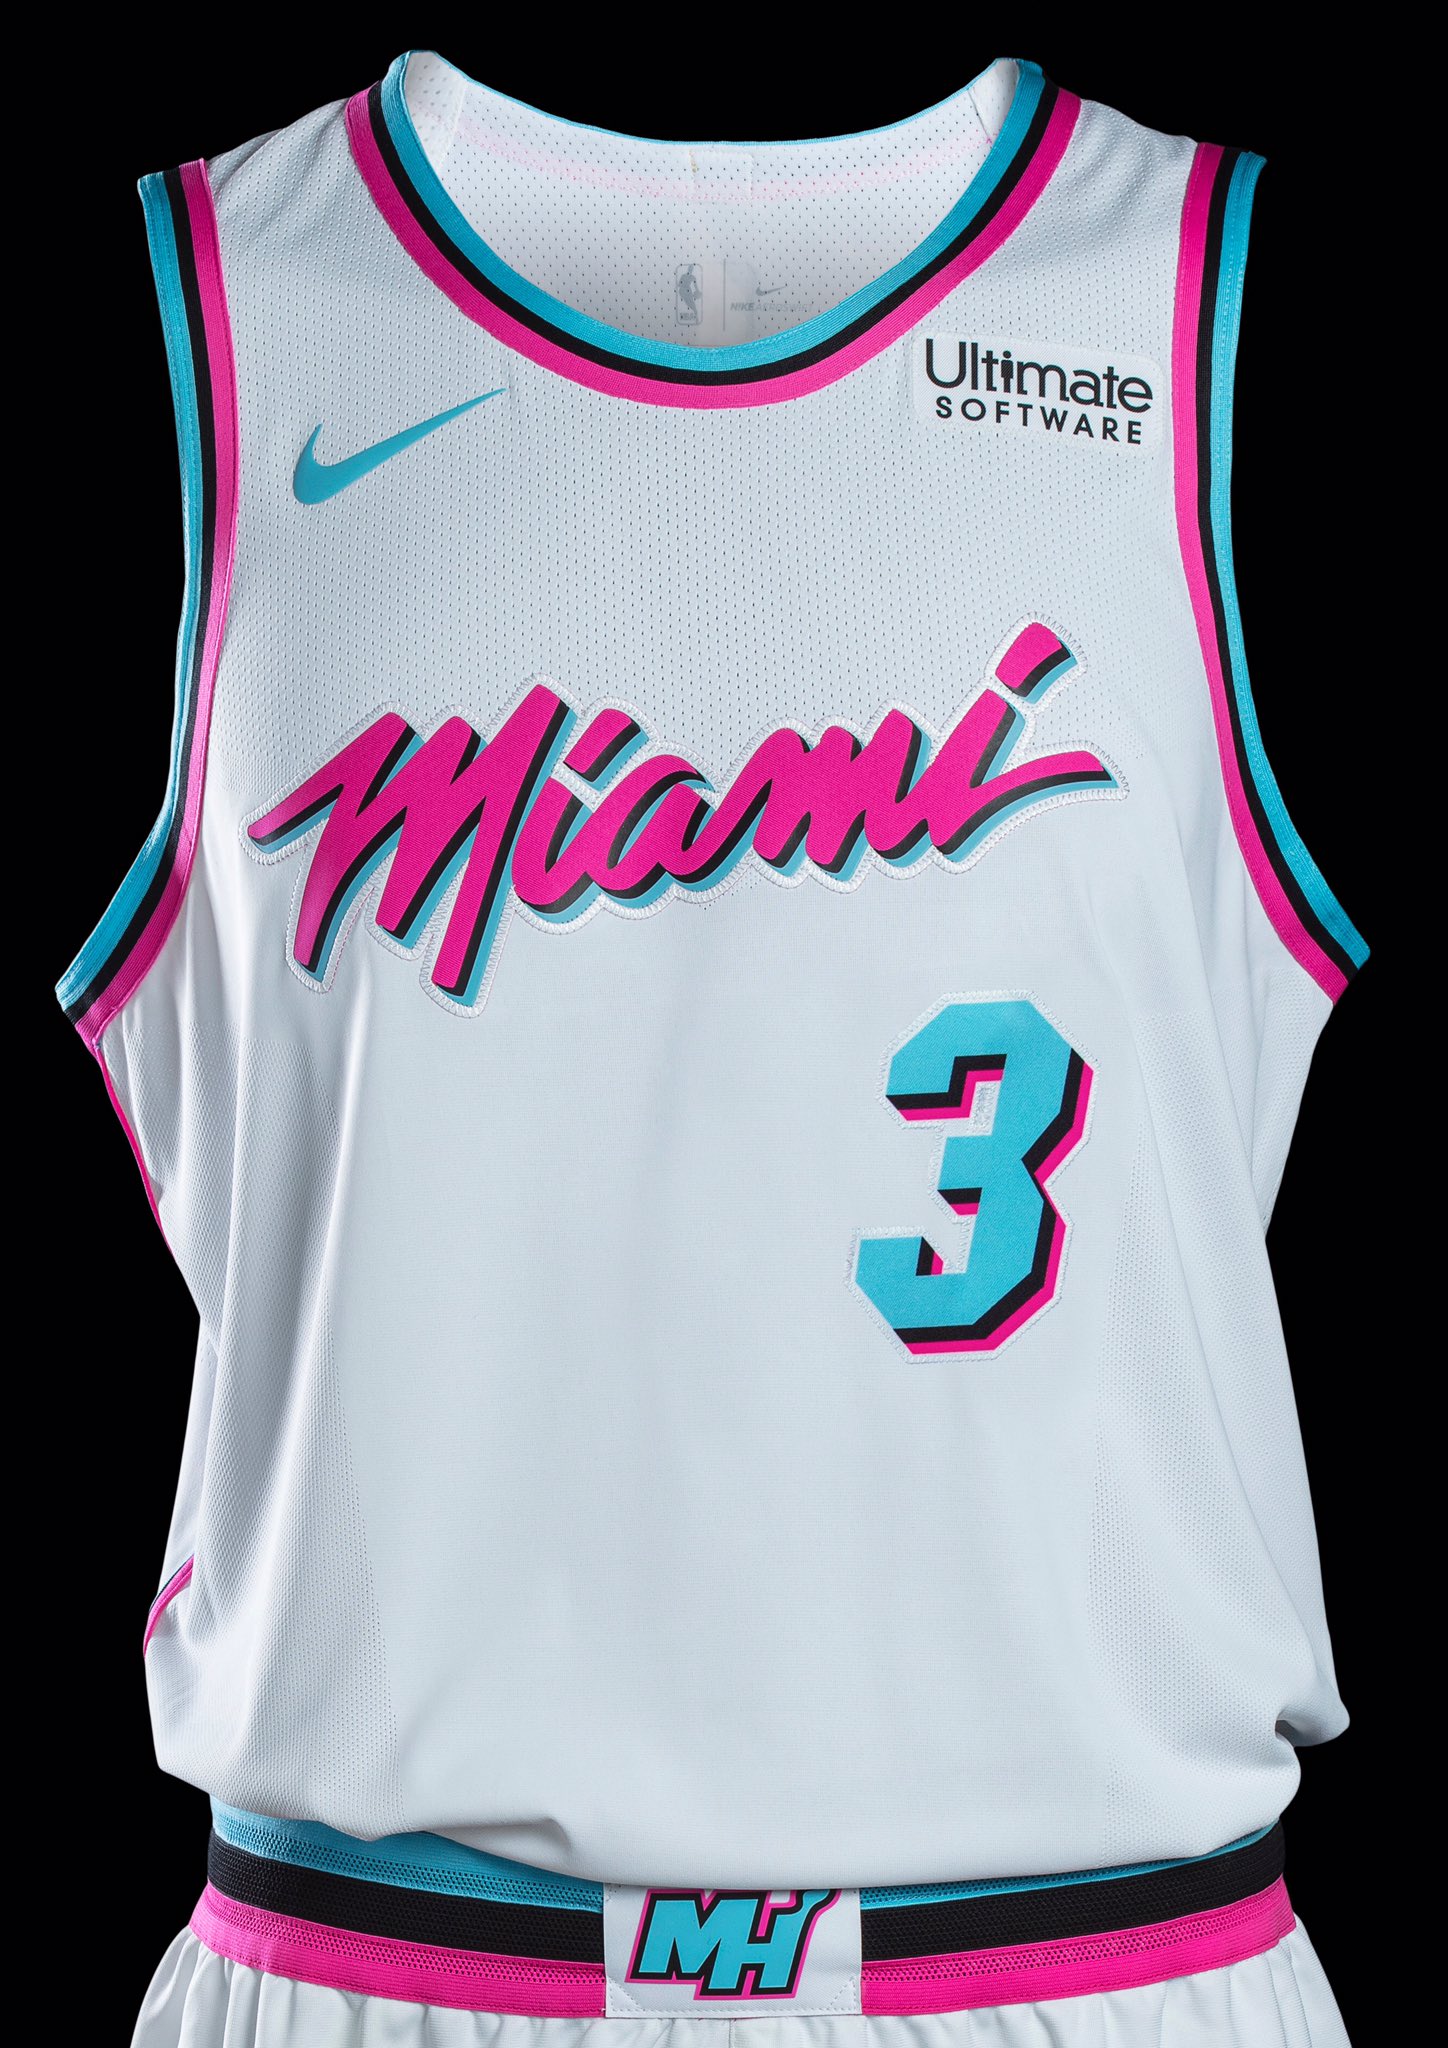 mineraal Infrarood Subjectief The Miami HEAT Store on Twitter: "Good things come to those who wait... @ MiamiHEAT VICE Jerseys have made a #R3TURN! You can NOW reserve limited  quantities, hurry! https://t.co/lFHcJKmqwh https://t.co/SqQYPOqm8N" /  Twitter